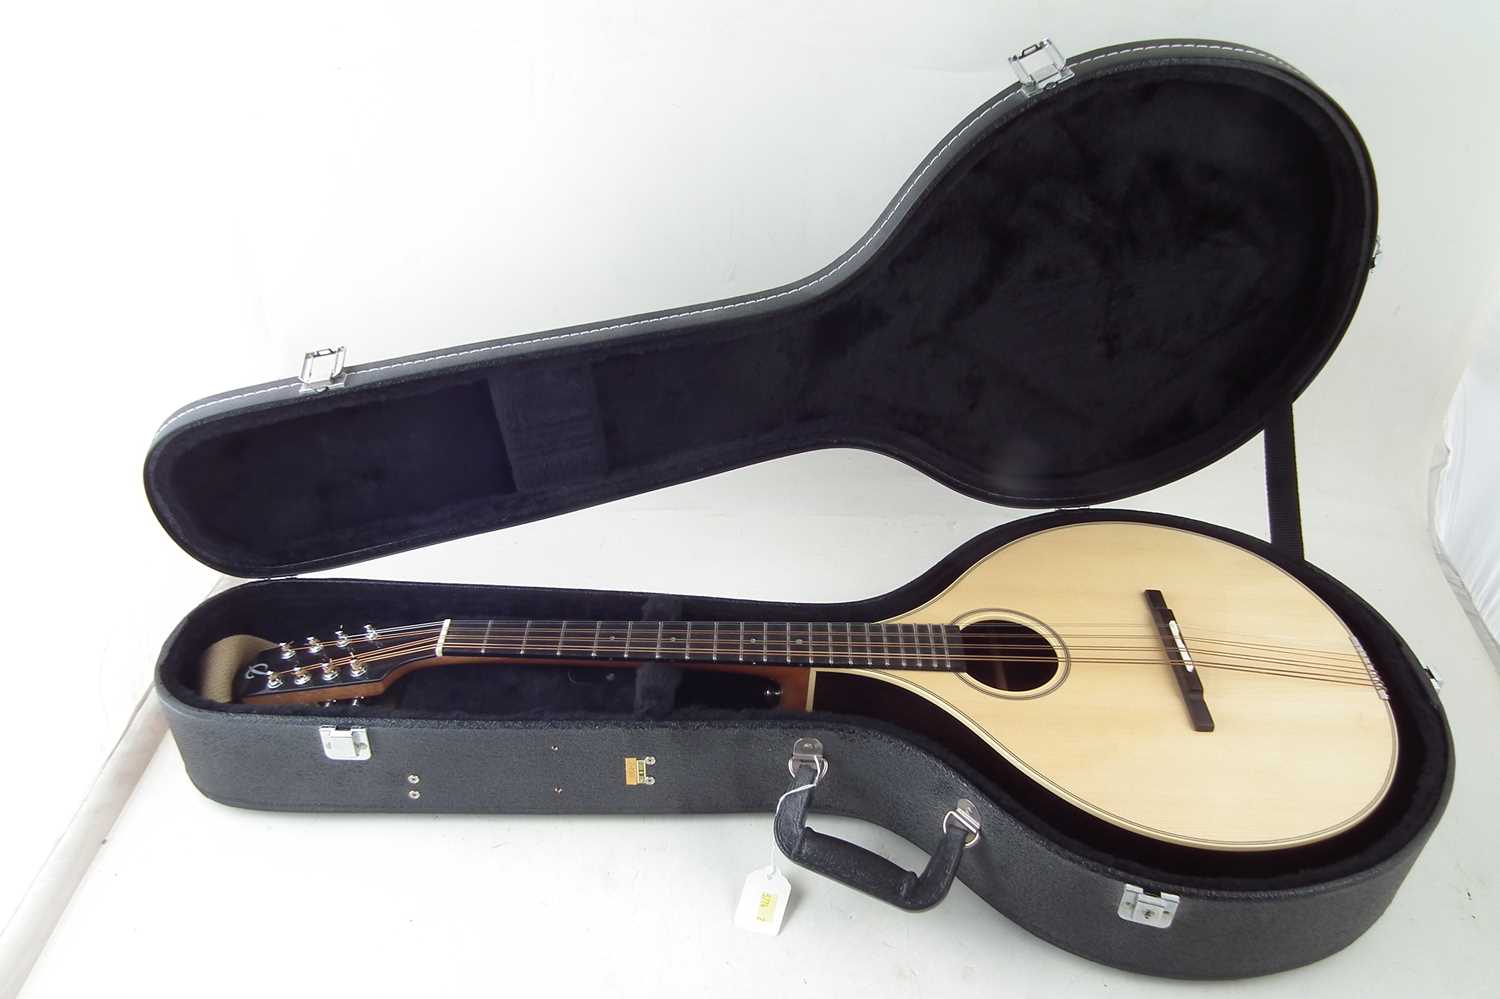 Packard octave mandola with case - Image 8 of 8